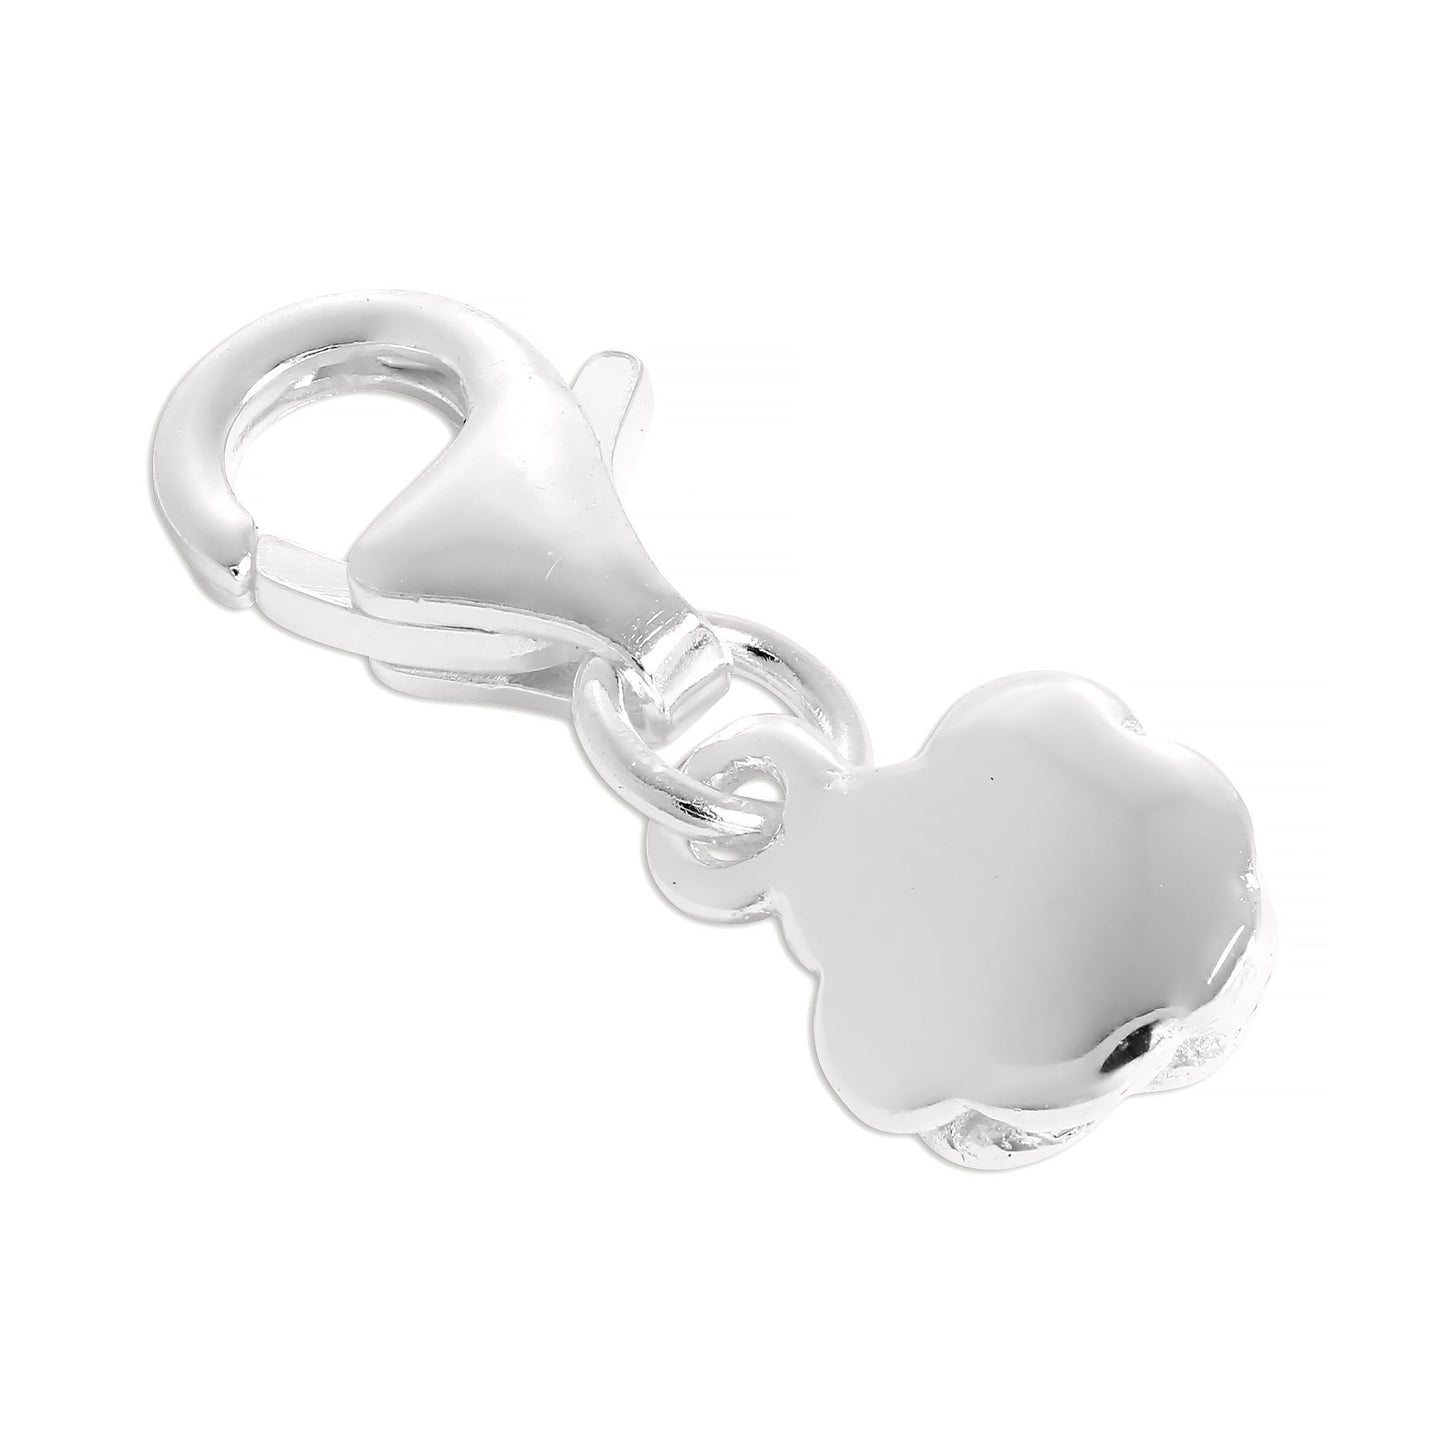 Small Sterling Silver Rose Bud Clip on Charm